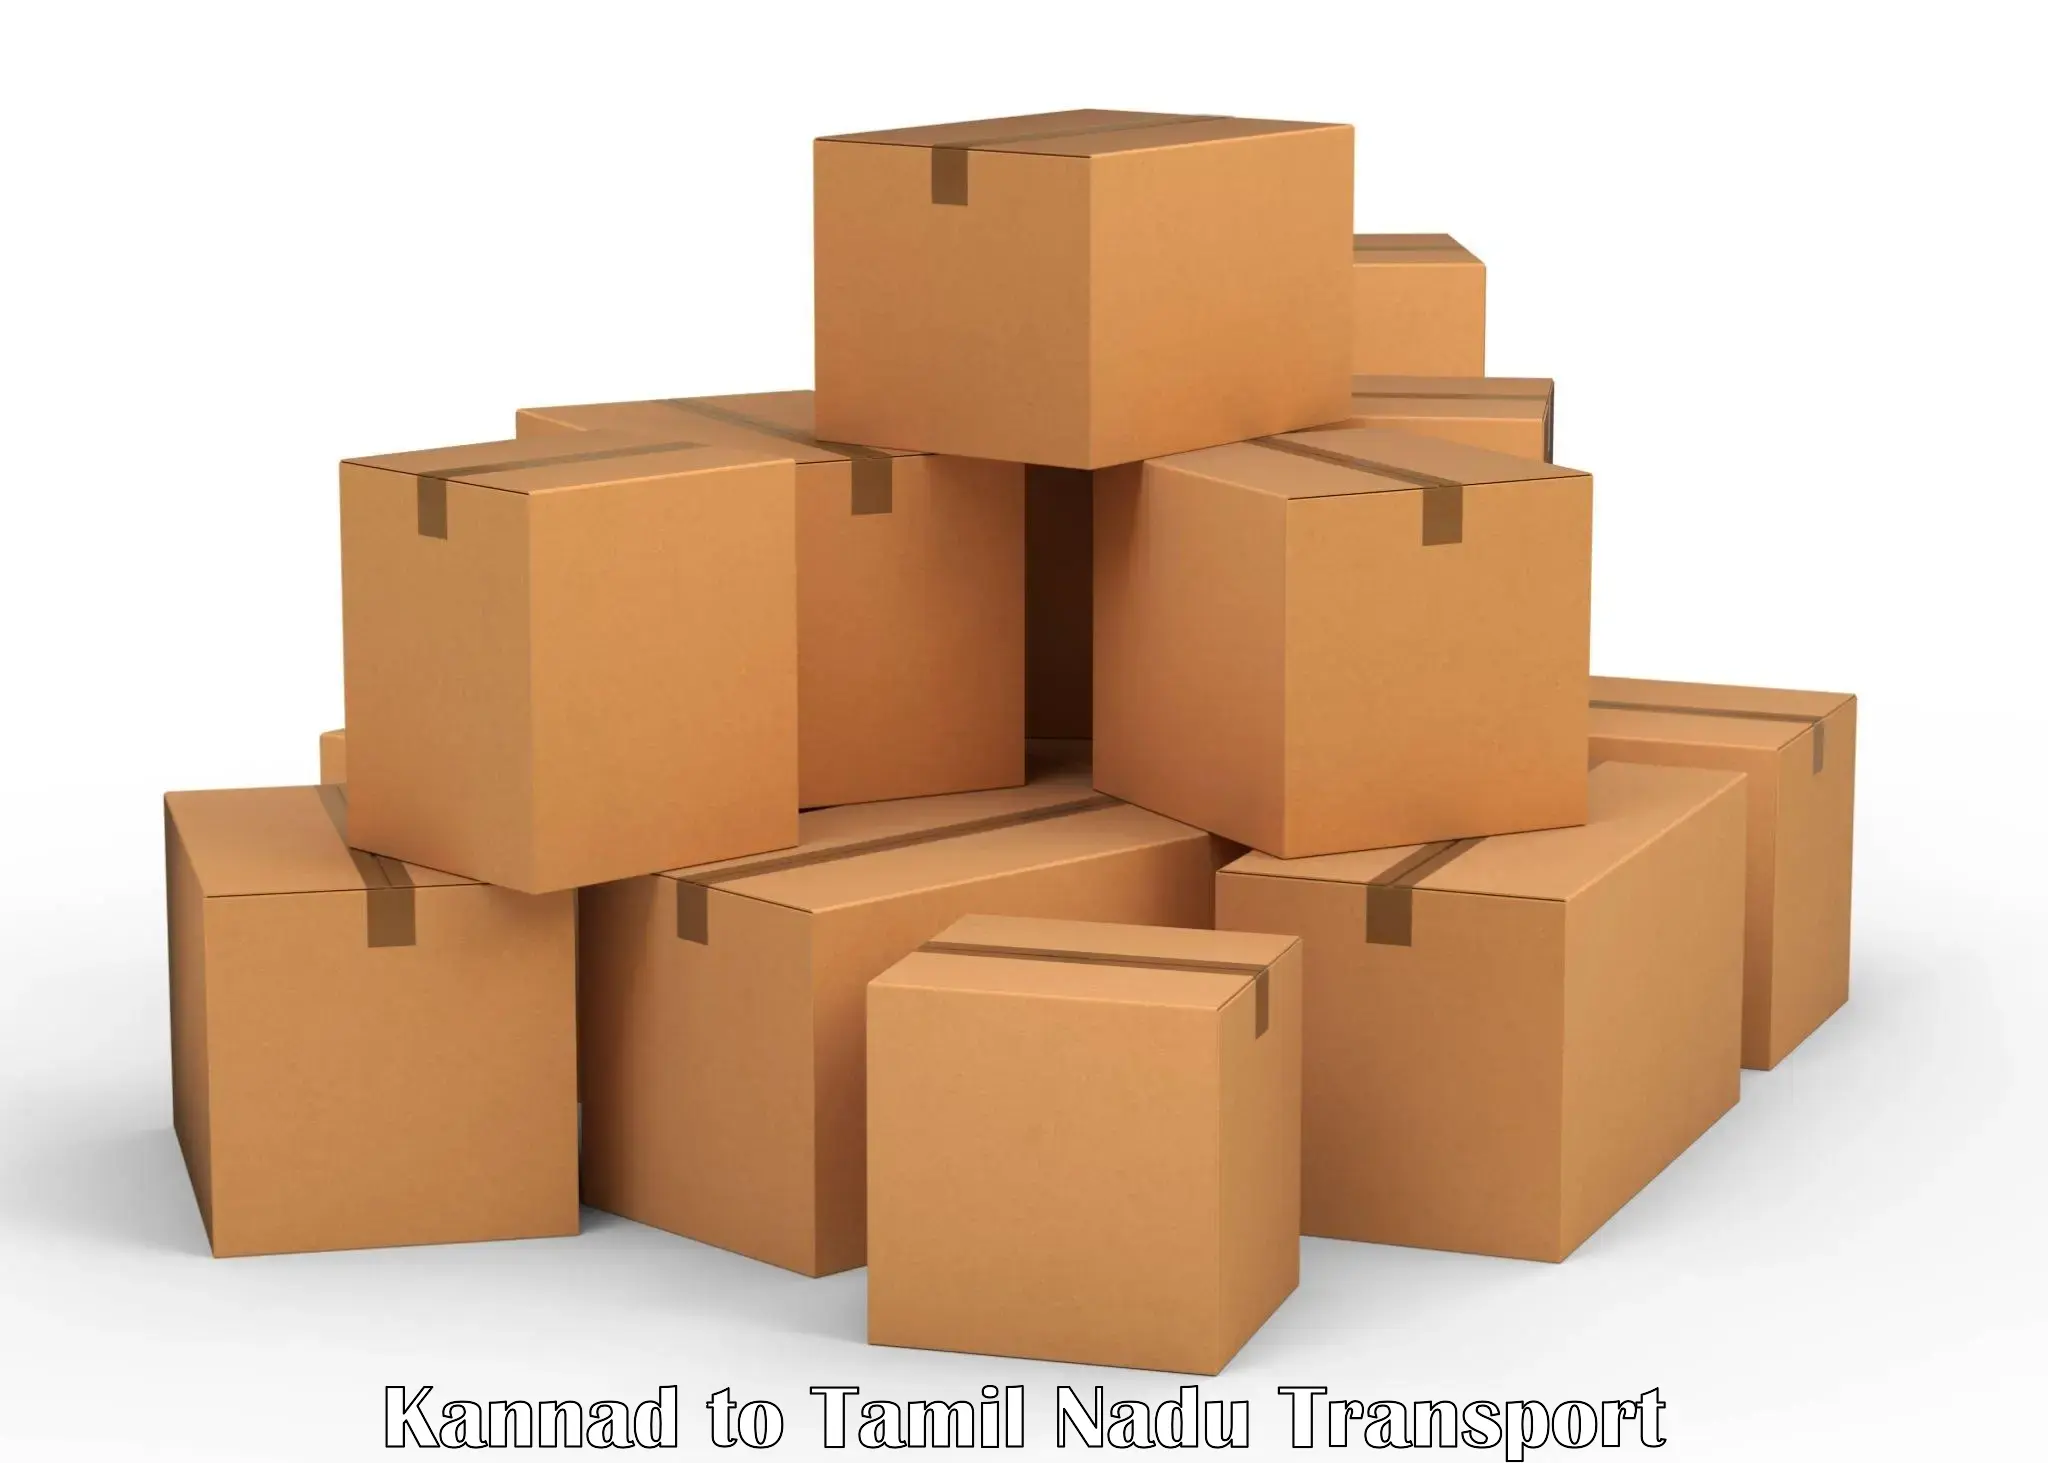 Goods transport services Kannad to Omalur